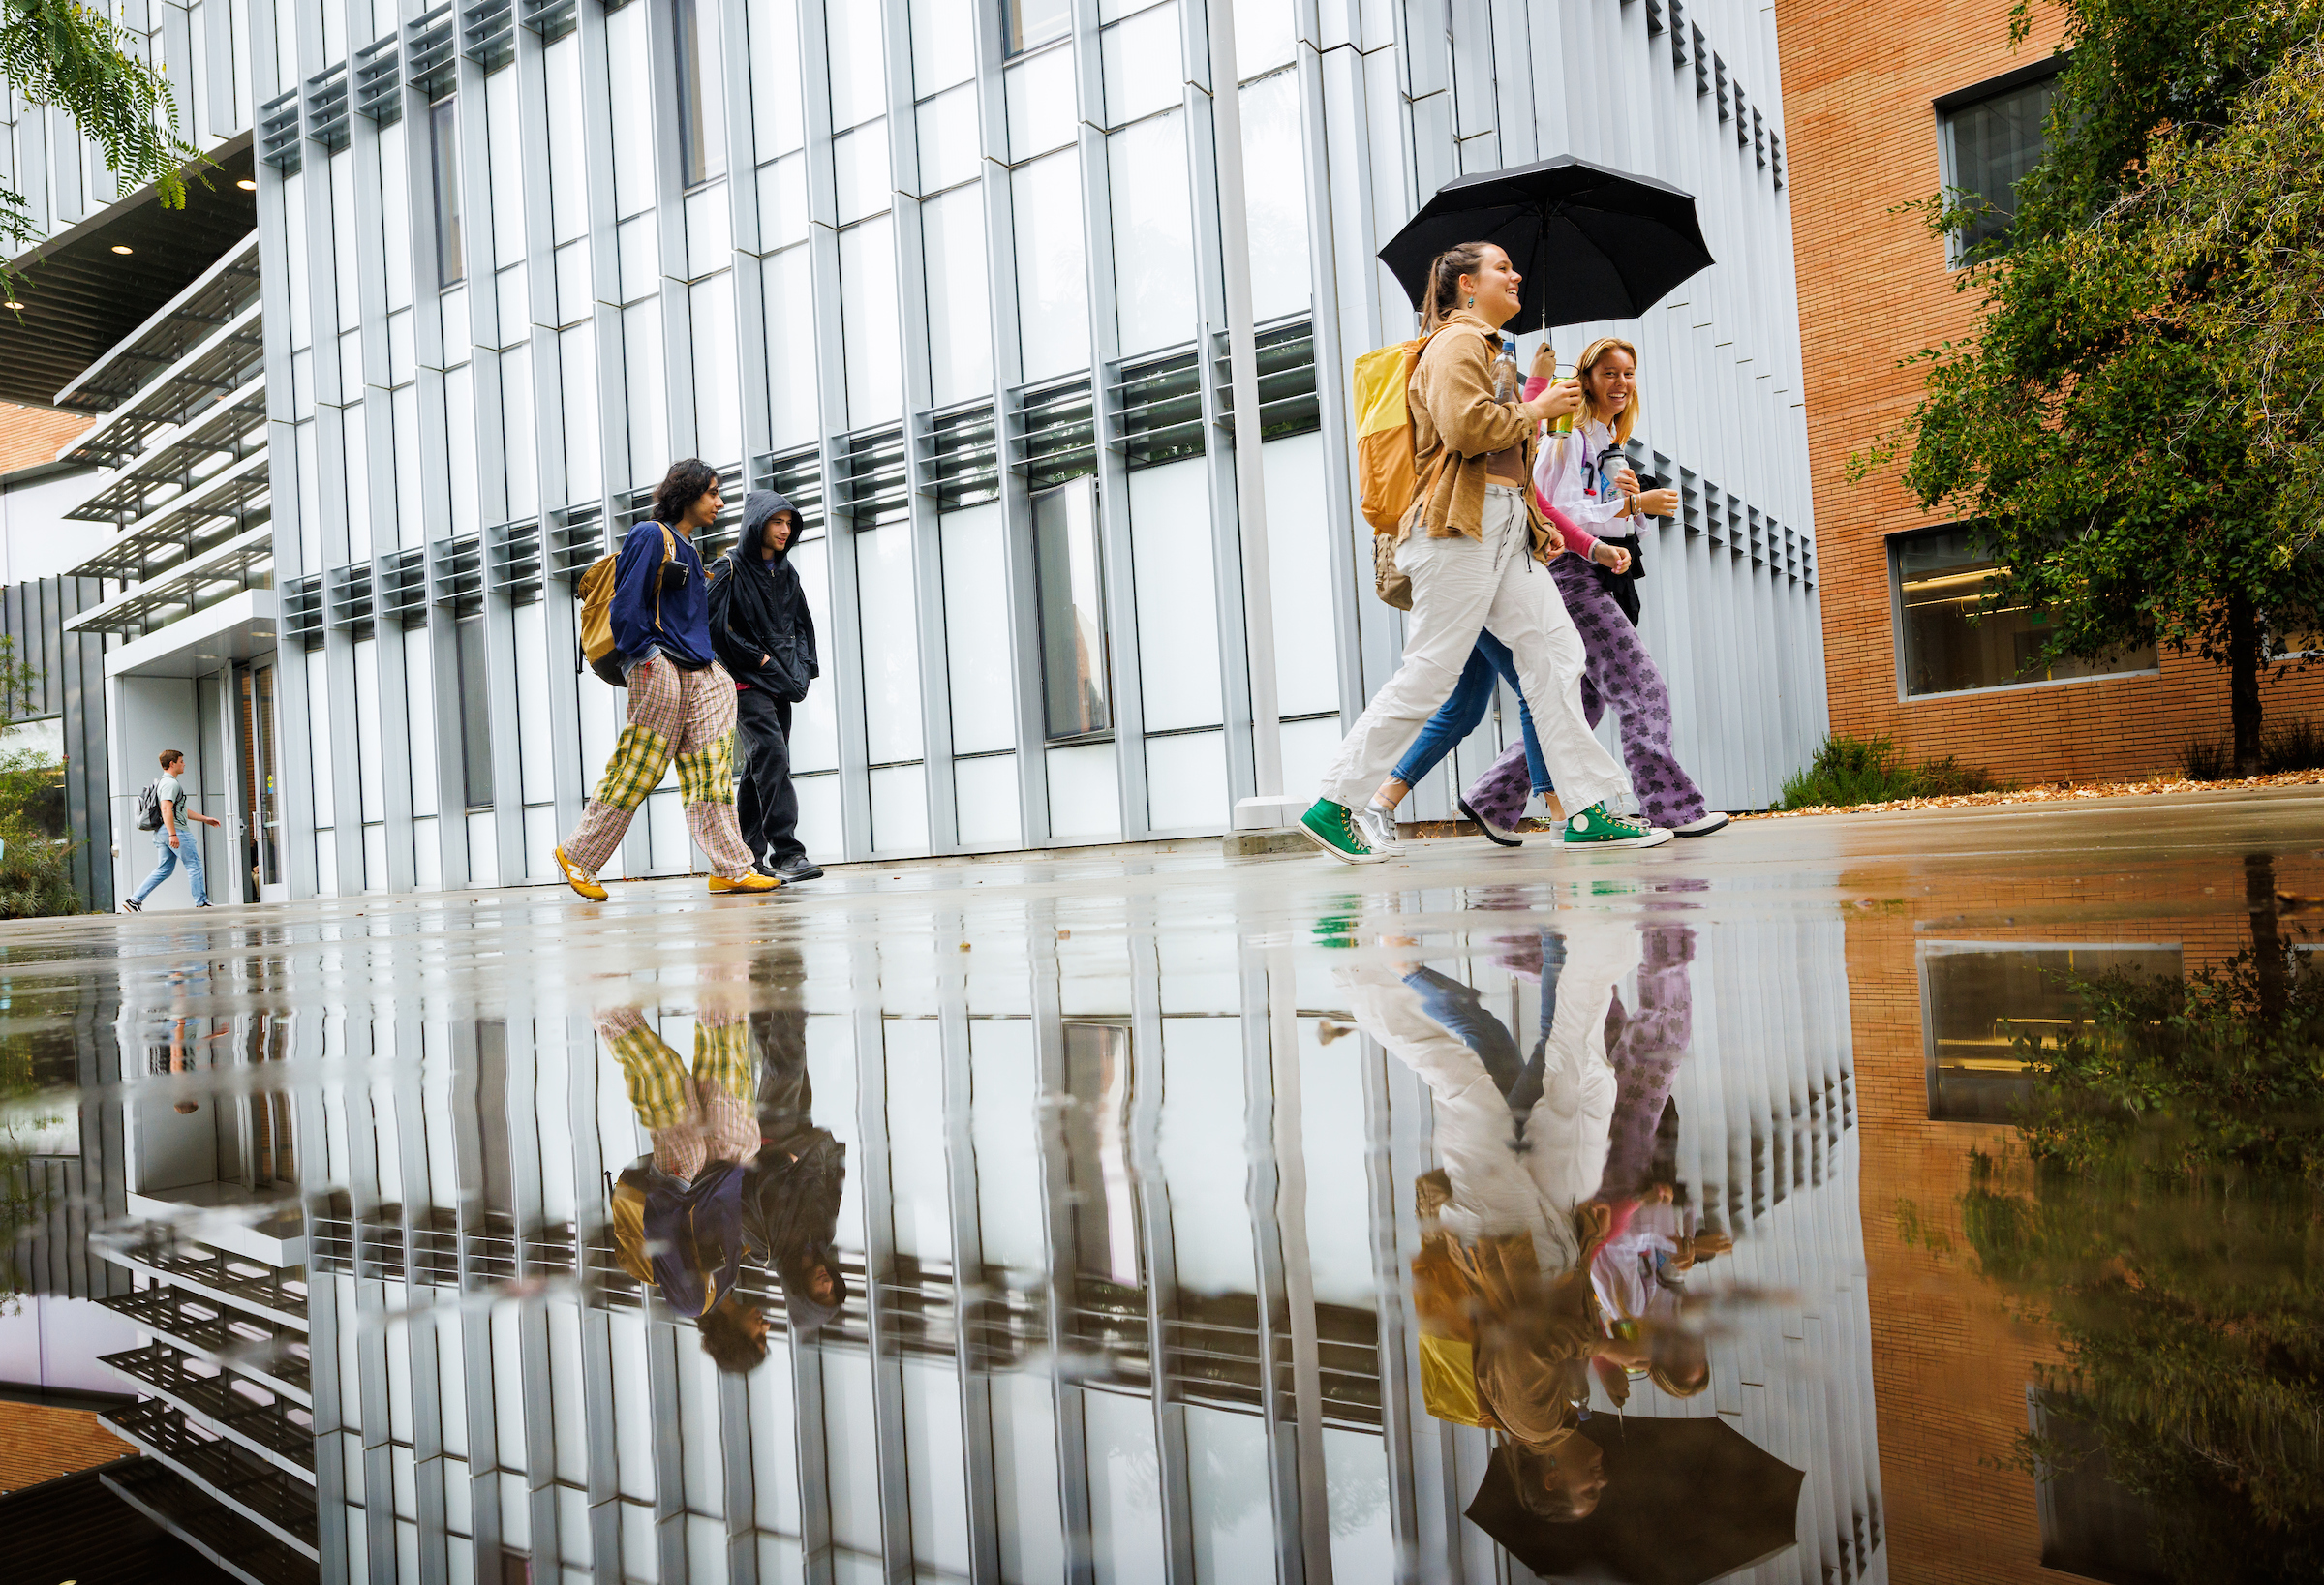 Students using umbrellas walk past a large puddle on campus.